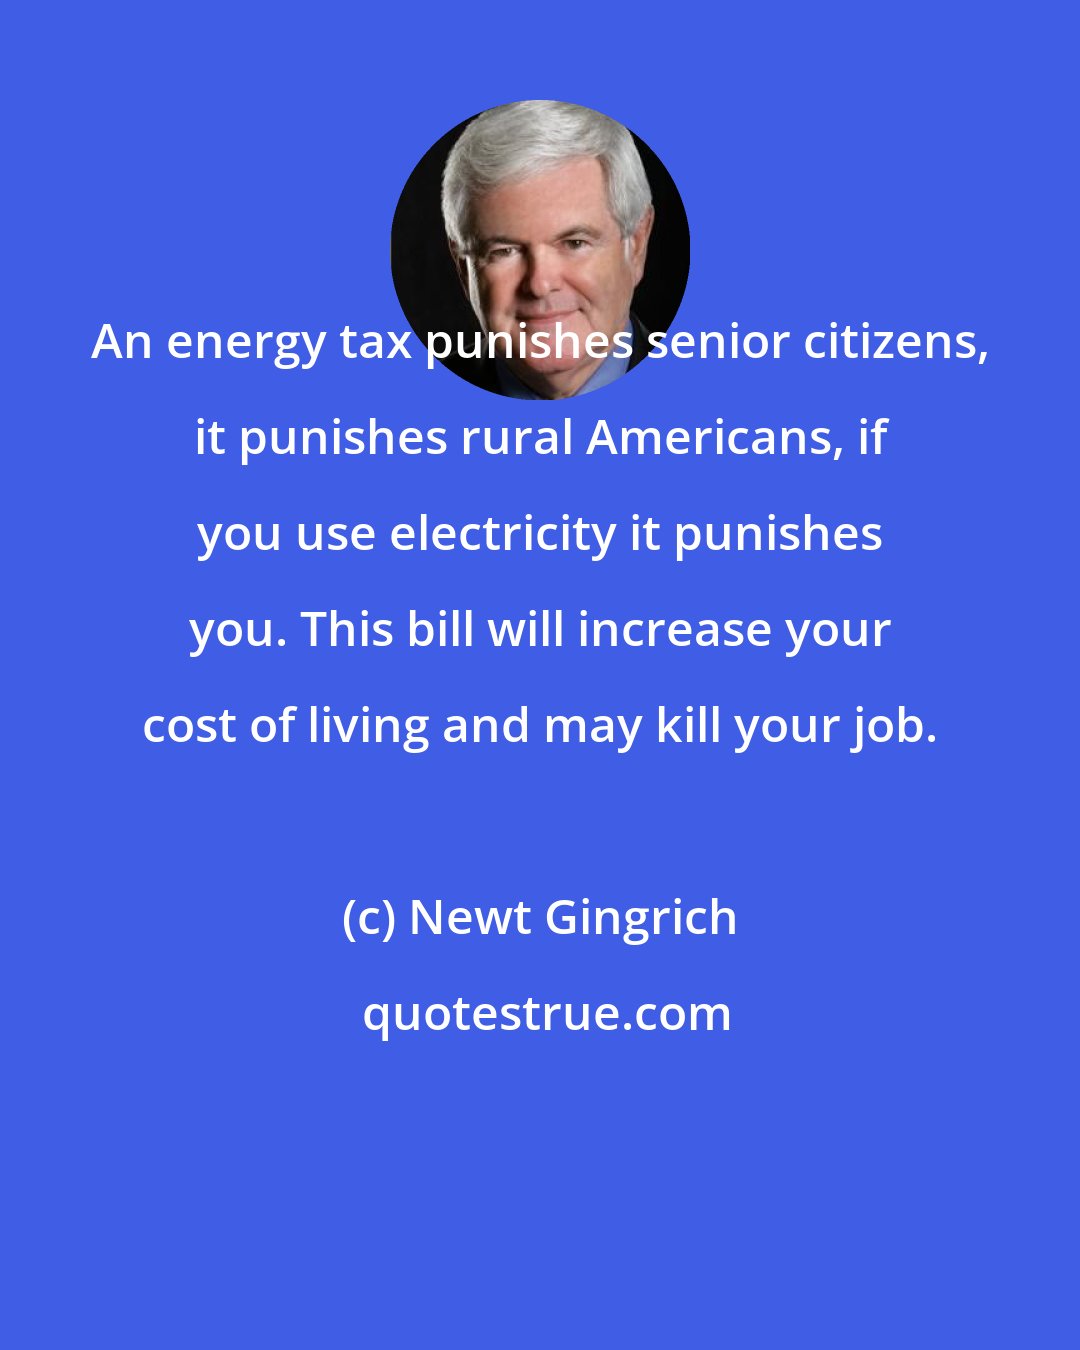 Newt Gingrich: An energy tax punishes senior citizens, it punishes rural Americans, if you use electricity it punishes you. This bill will increase your cost of living and may kill your job.